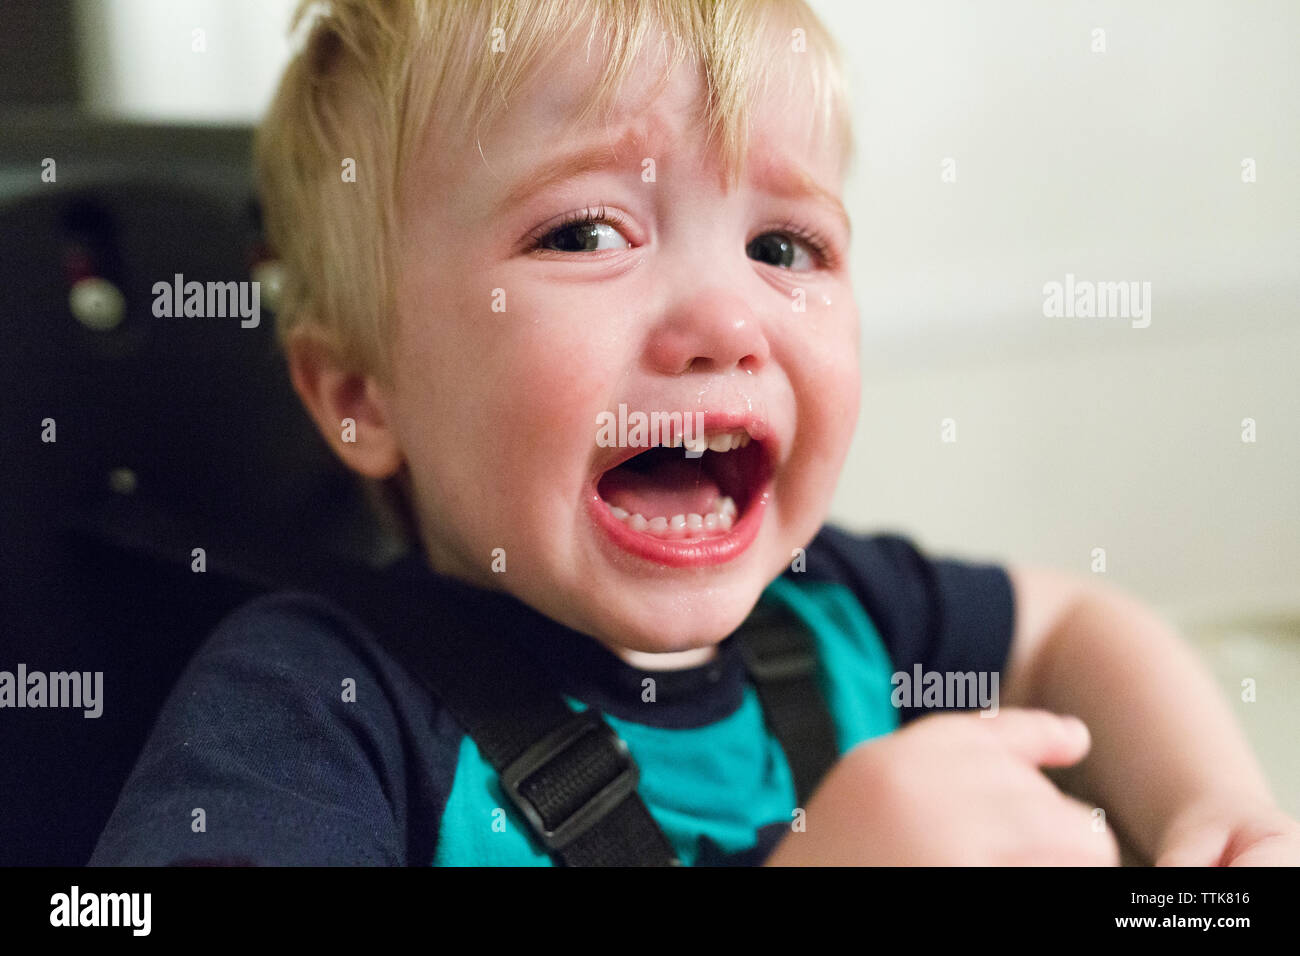 Close-up portrait of angry baby boy crying while sitting on high chair at home Stock Photo